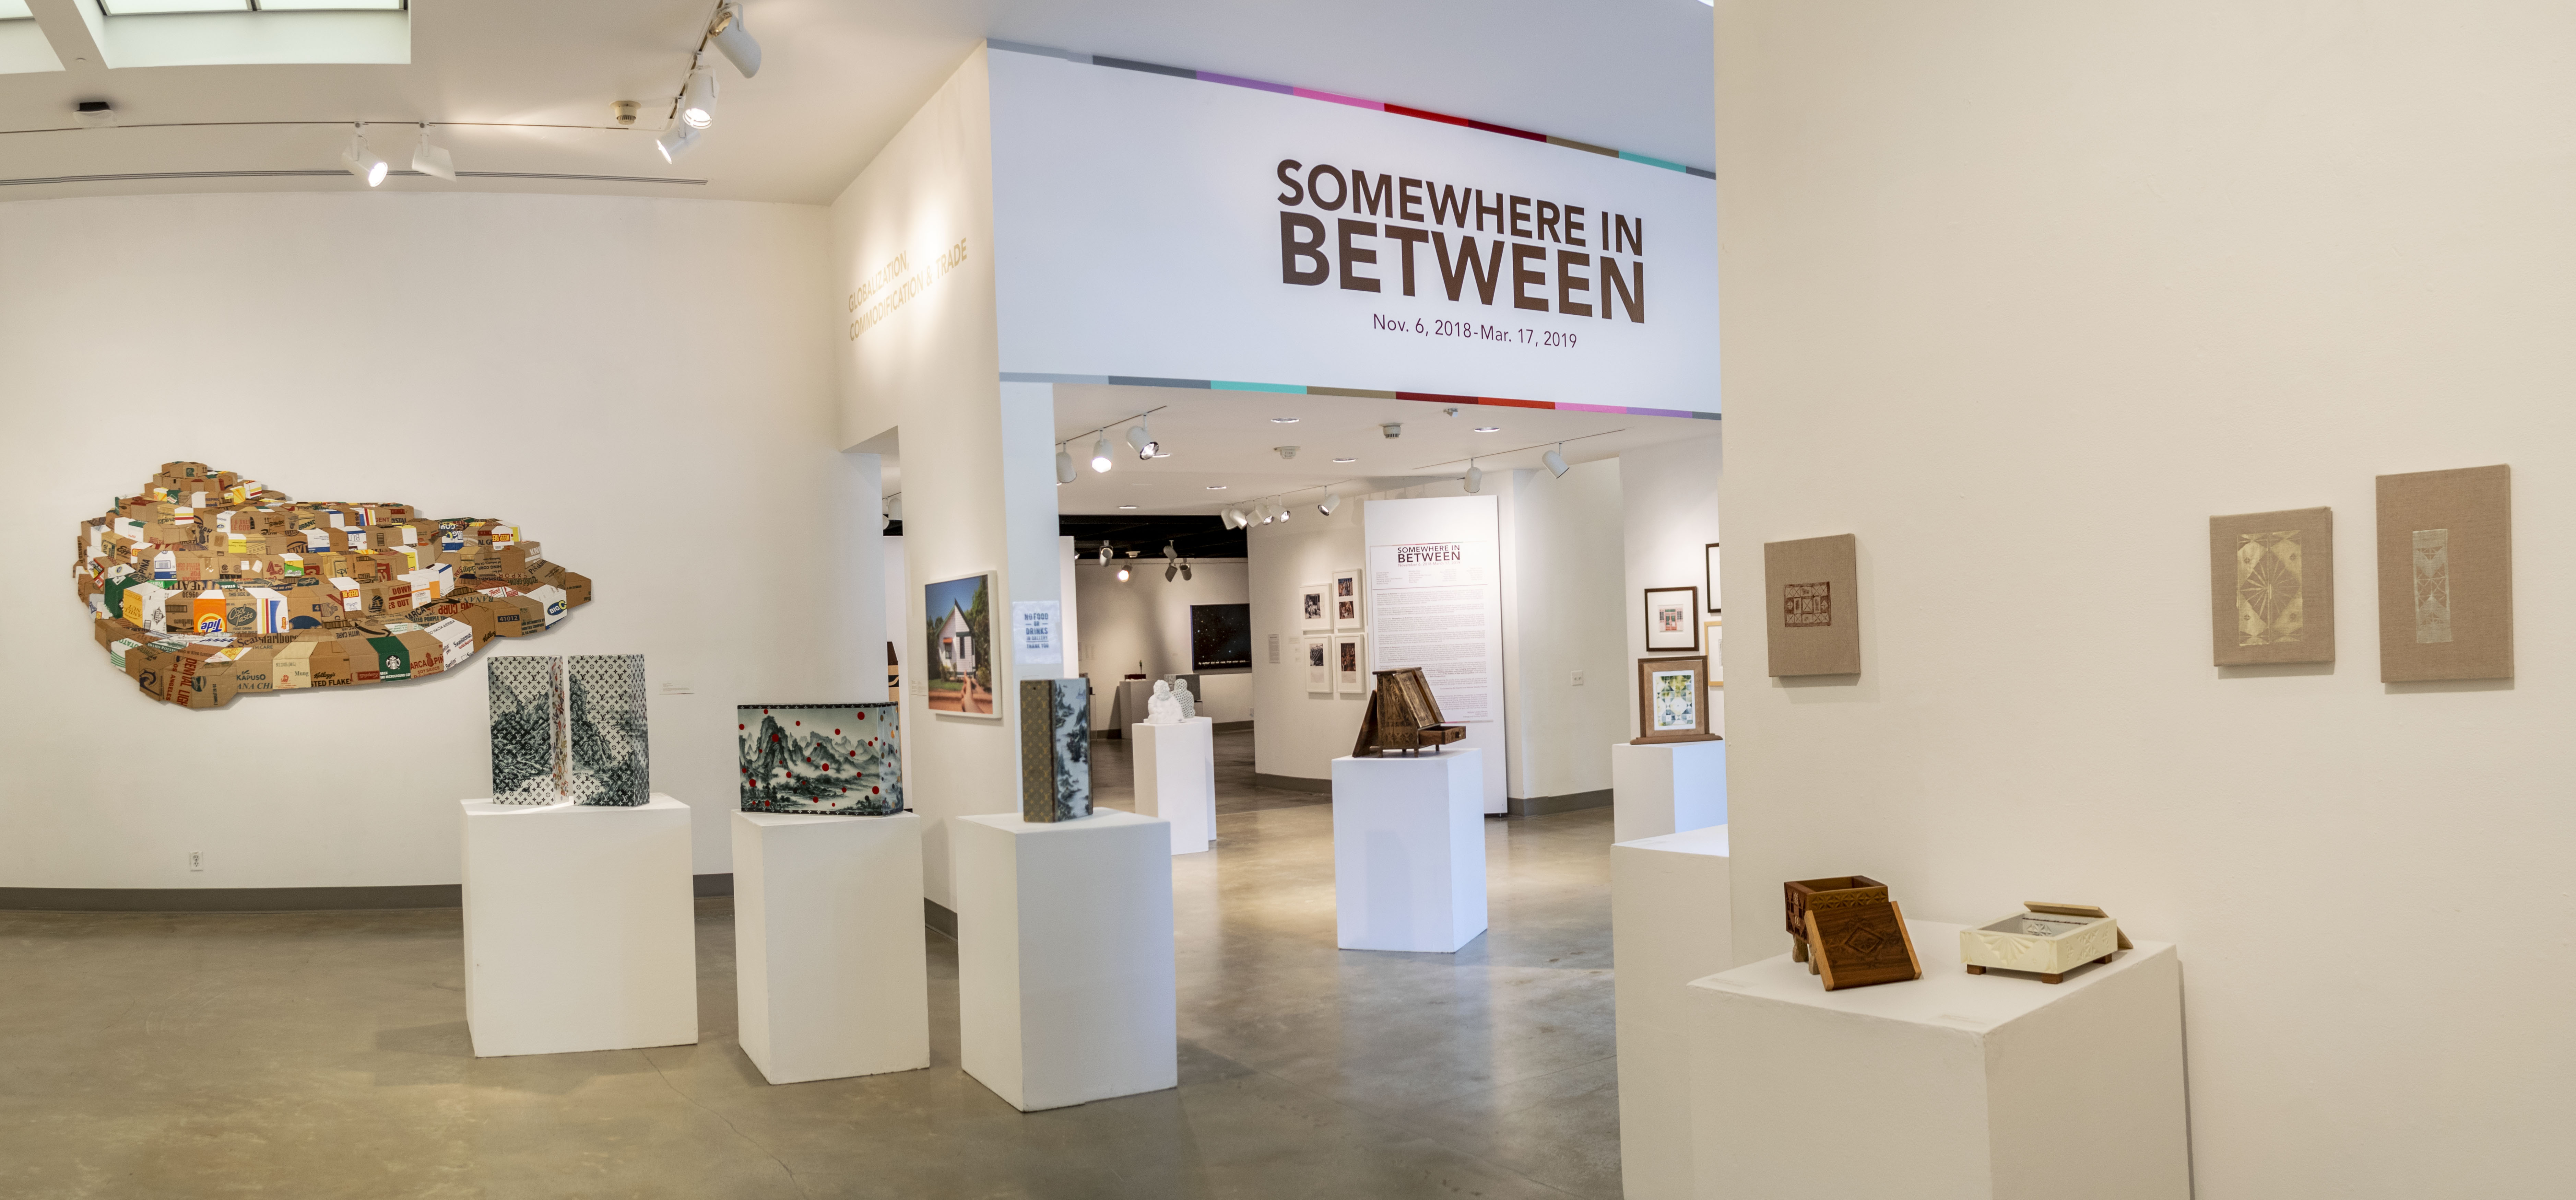 Front eastside view of the gallery, Exhibition: Somewhere In Between, Nov 6, 2018 - Mar 17, 2019,  Co-curated by Michele Cairella Fillmore & Bia Gayotto, W. Keith & Janet Kellogg Art Gallery, Cal Poly Pomona.